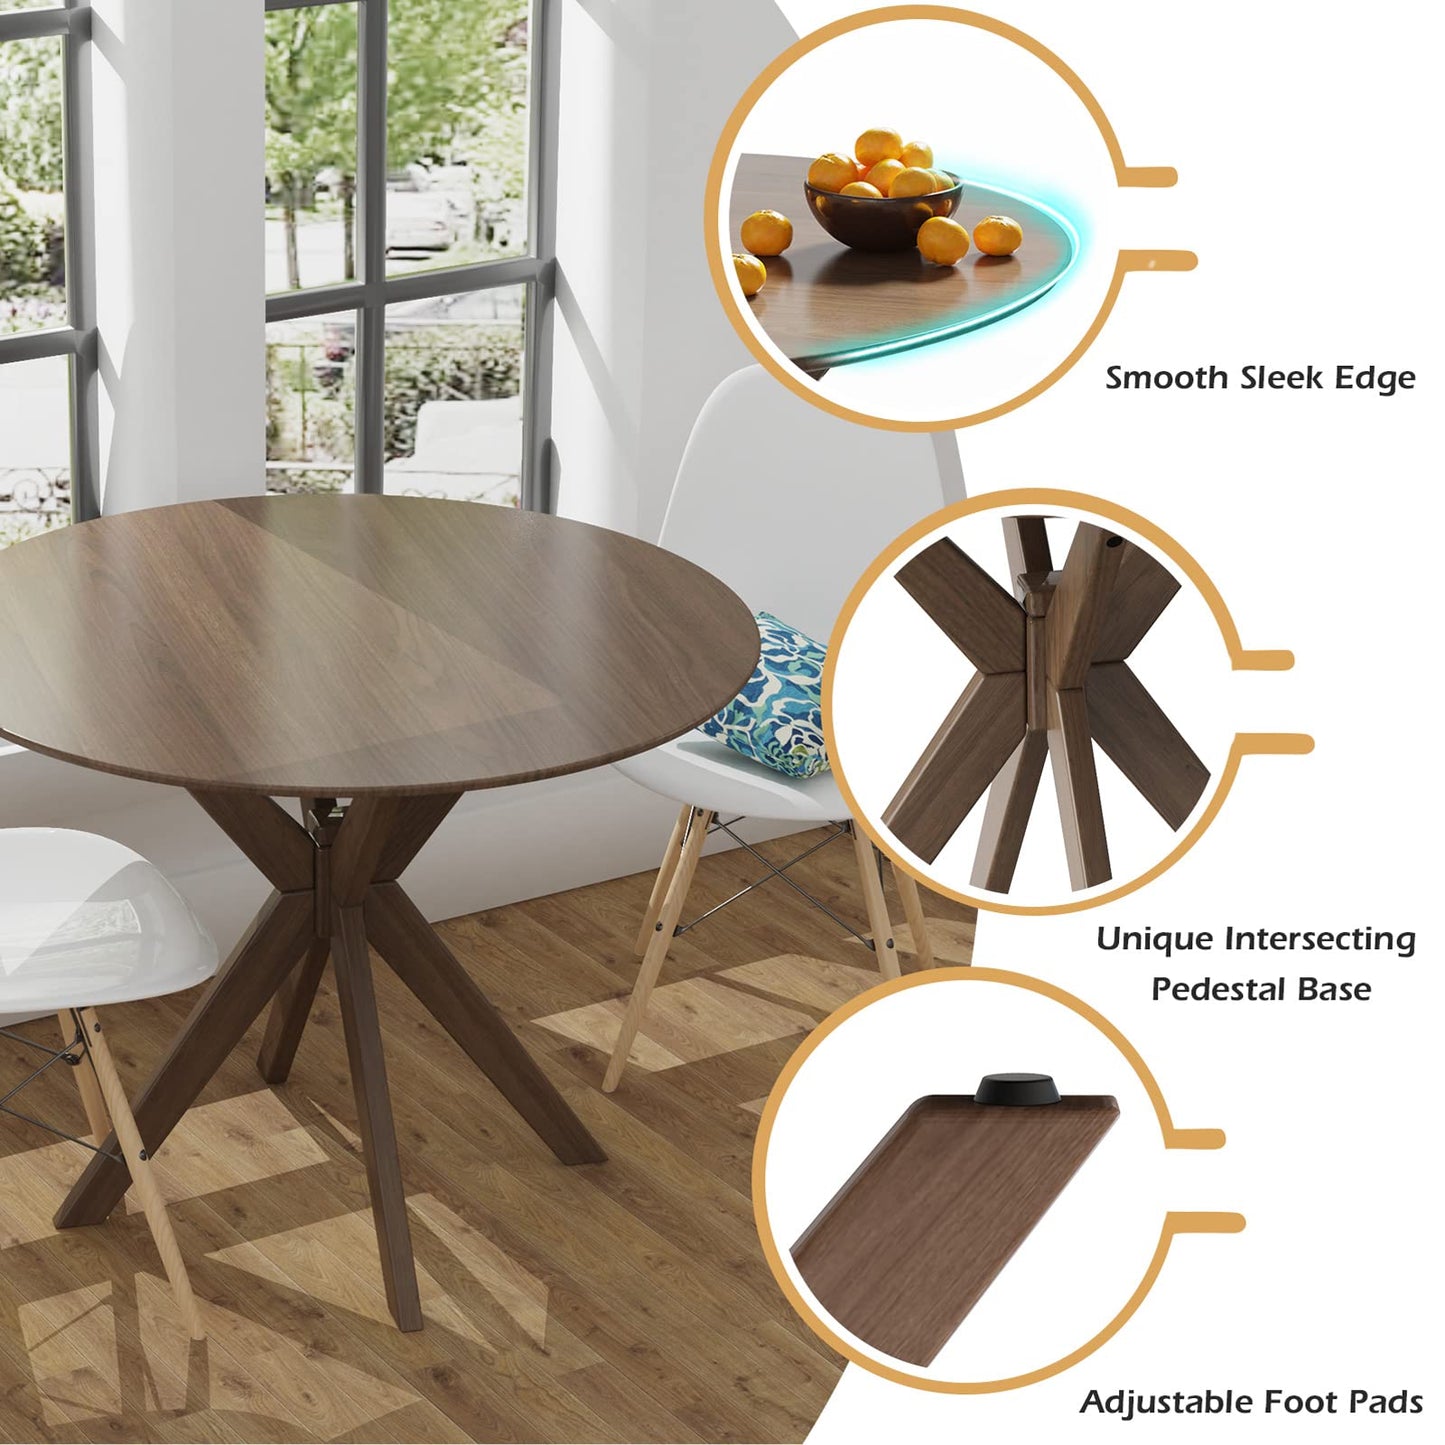 Giantex 36" Round Wood Dining Table, Farmhouse Kitchen Table w/Intersecting Pedestal Base & Solid Wood Legs, Vintage Coffee Table for Small Spaces,